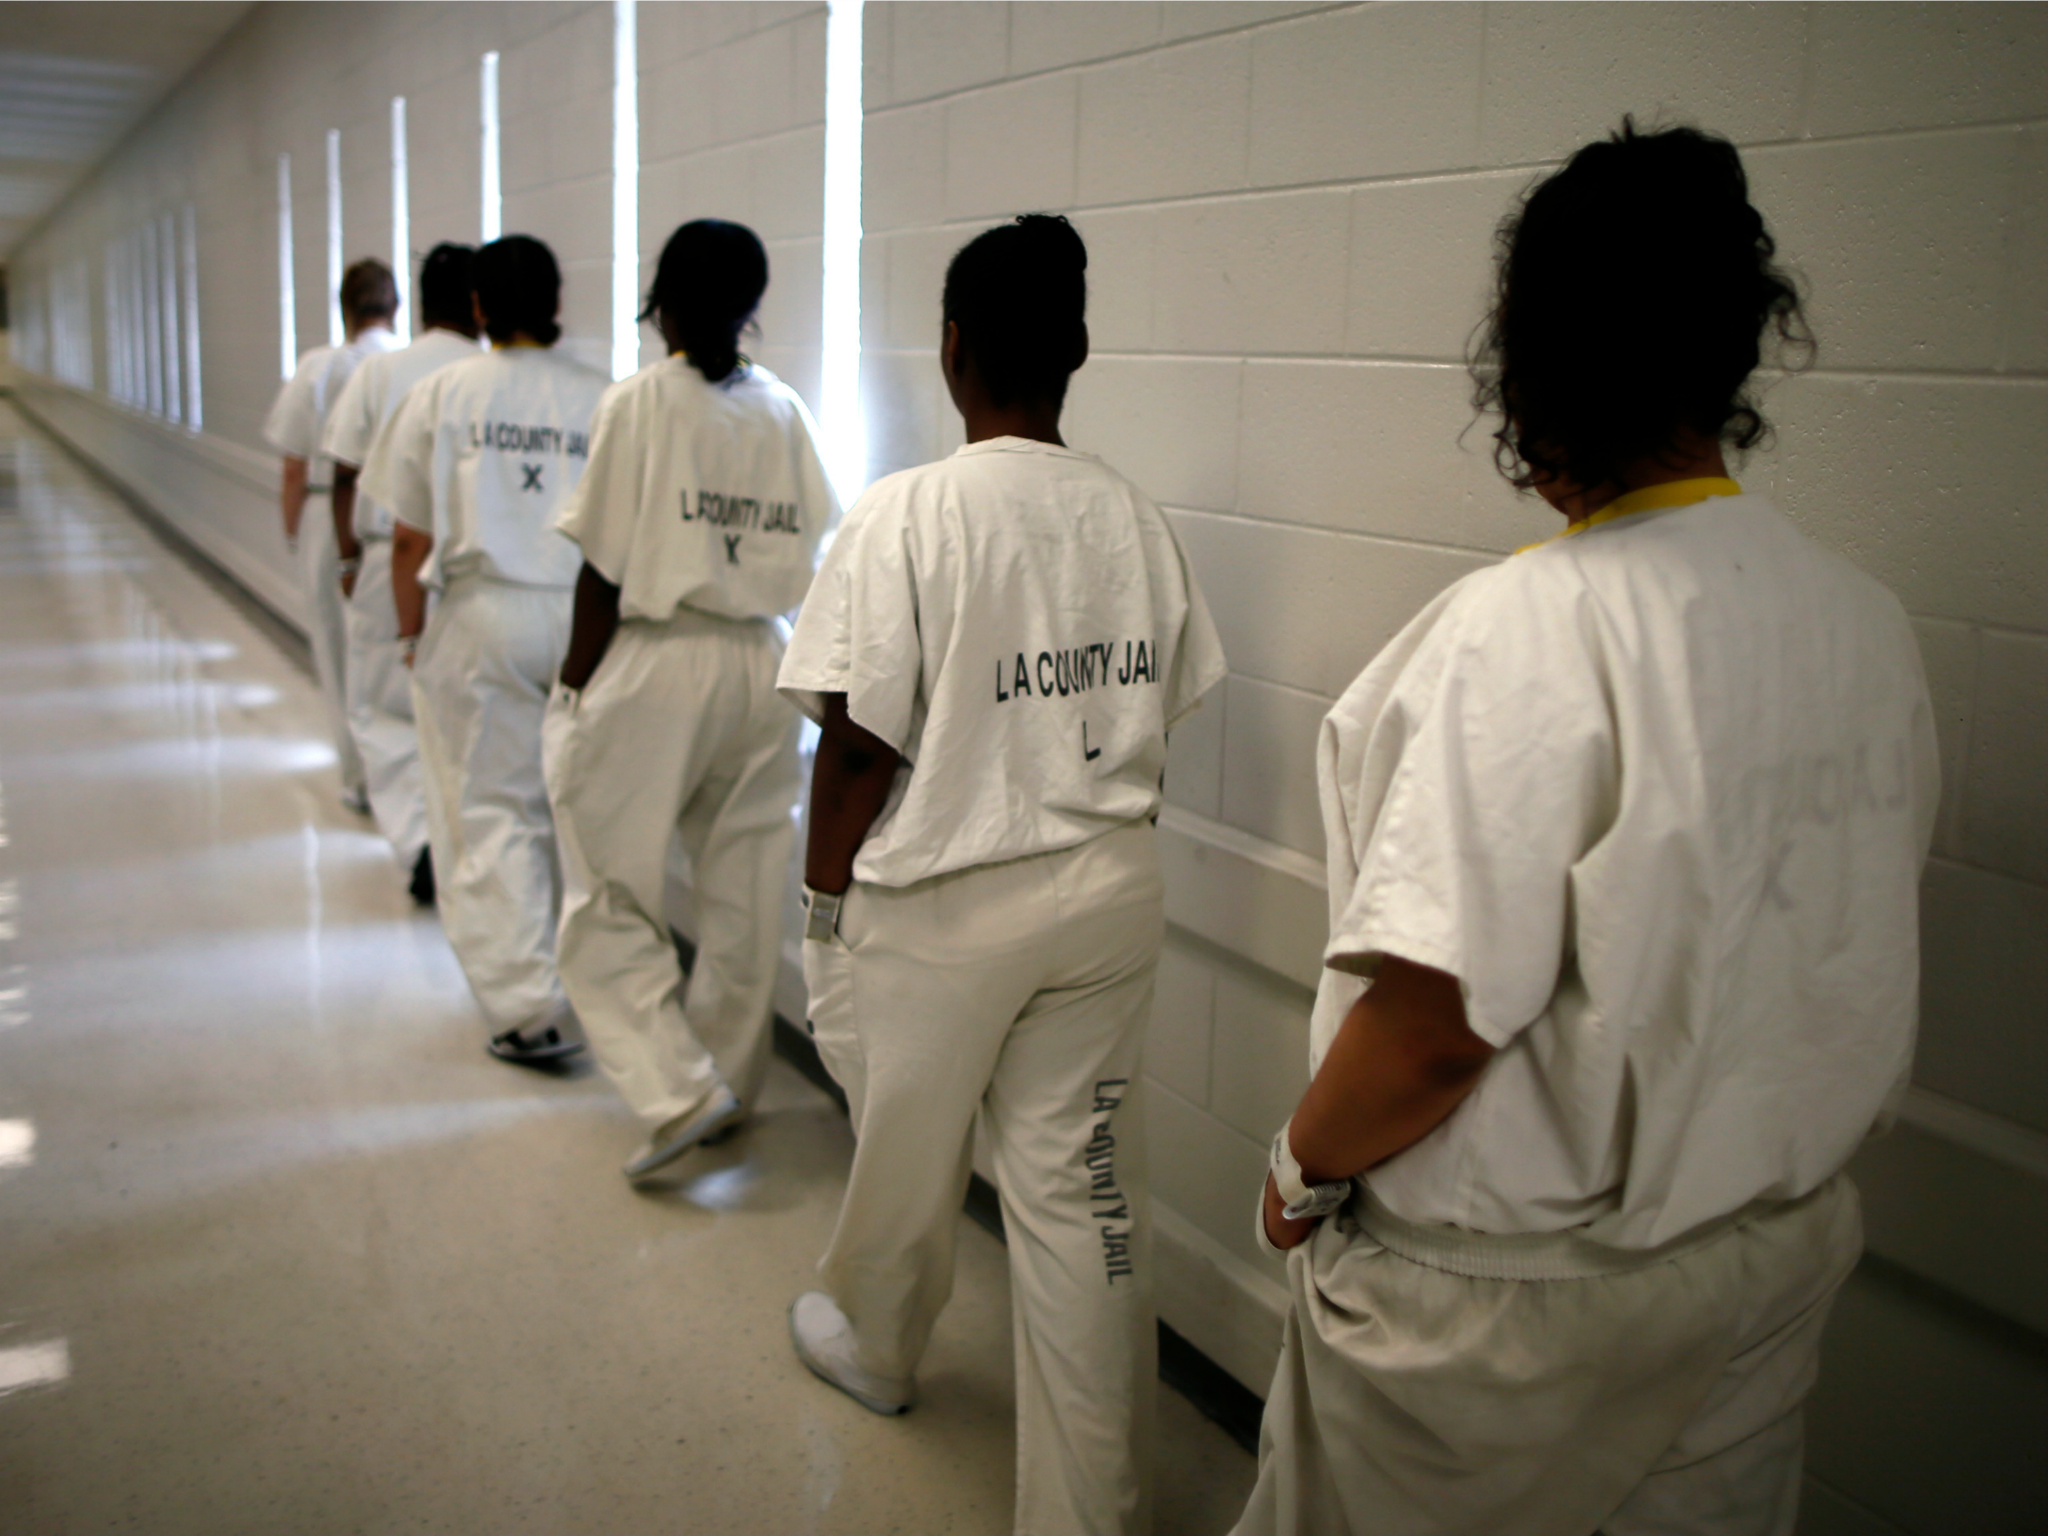 Female inmates at California's Lynwood detention facility, where a sheriff's deputy allegedly raped two women, on April 26, 2013